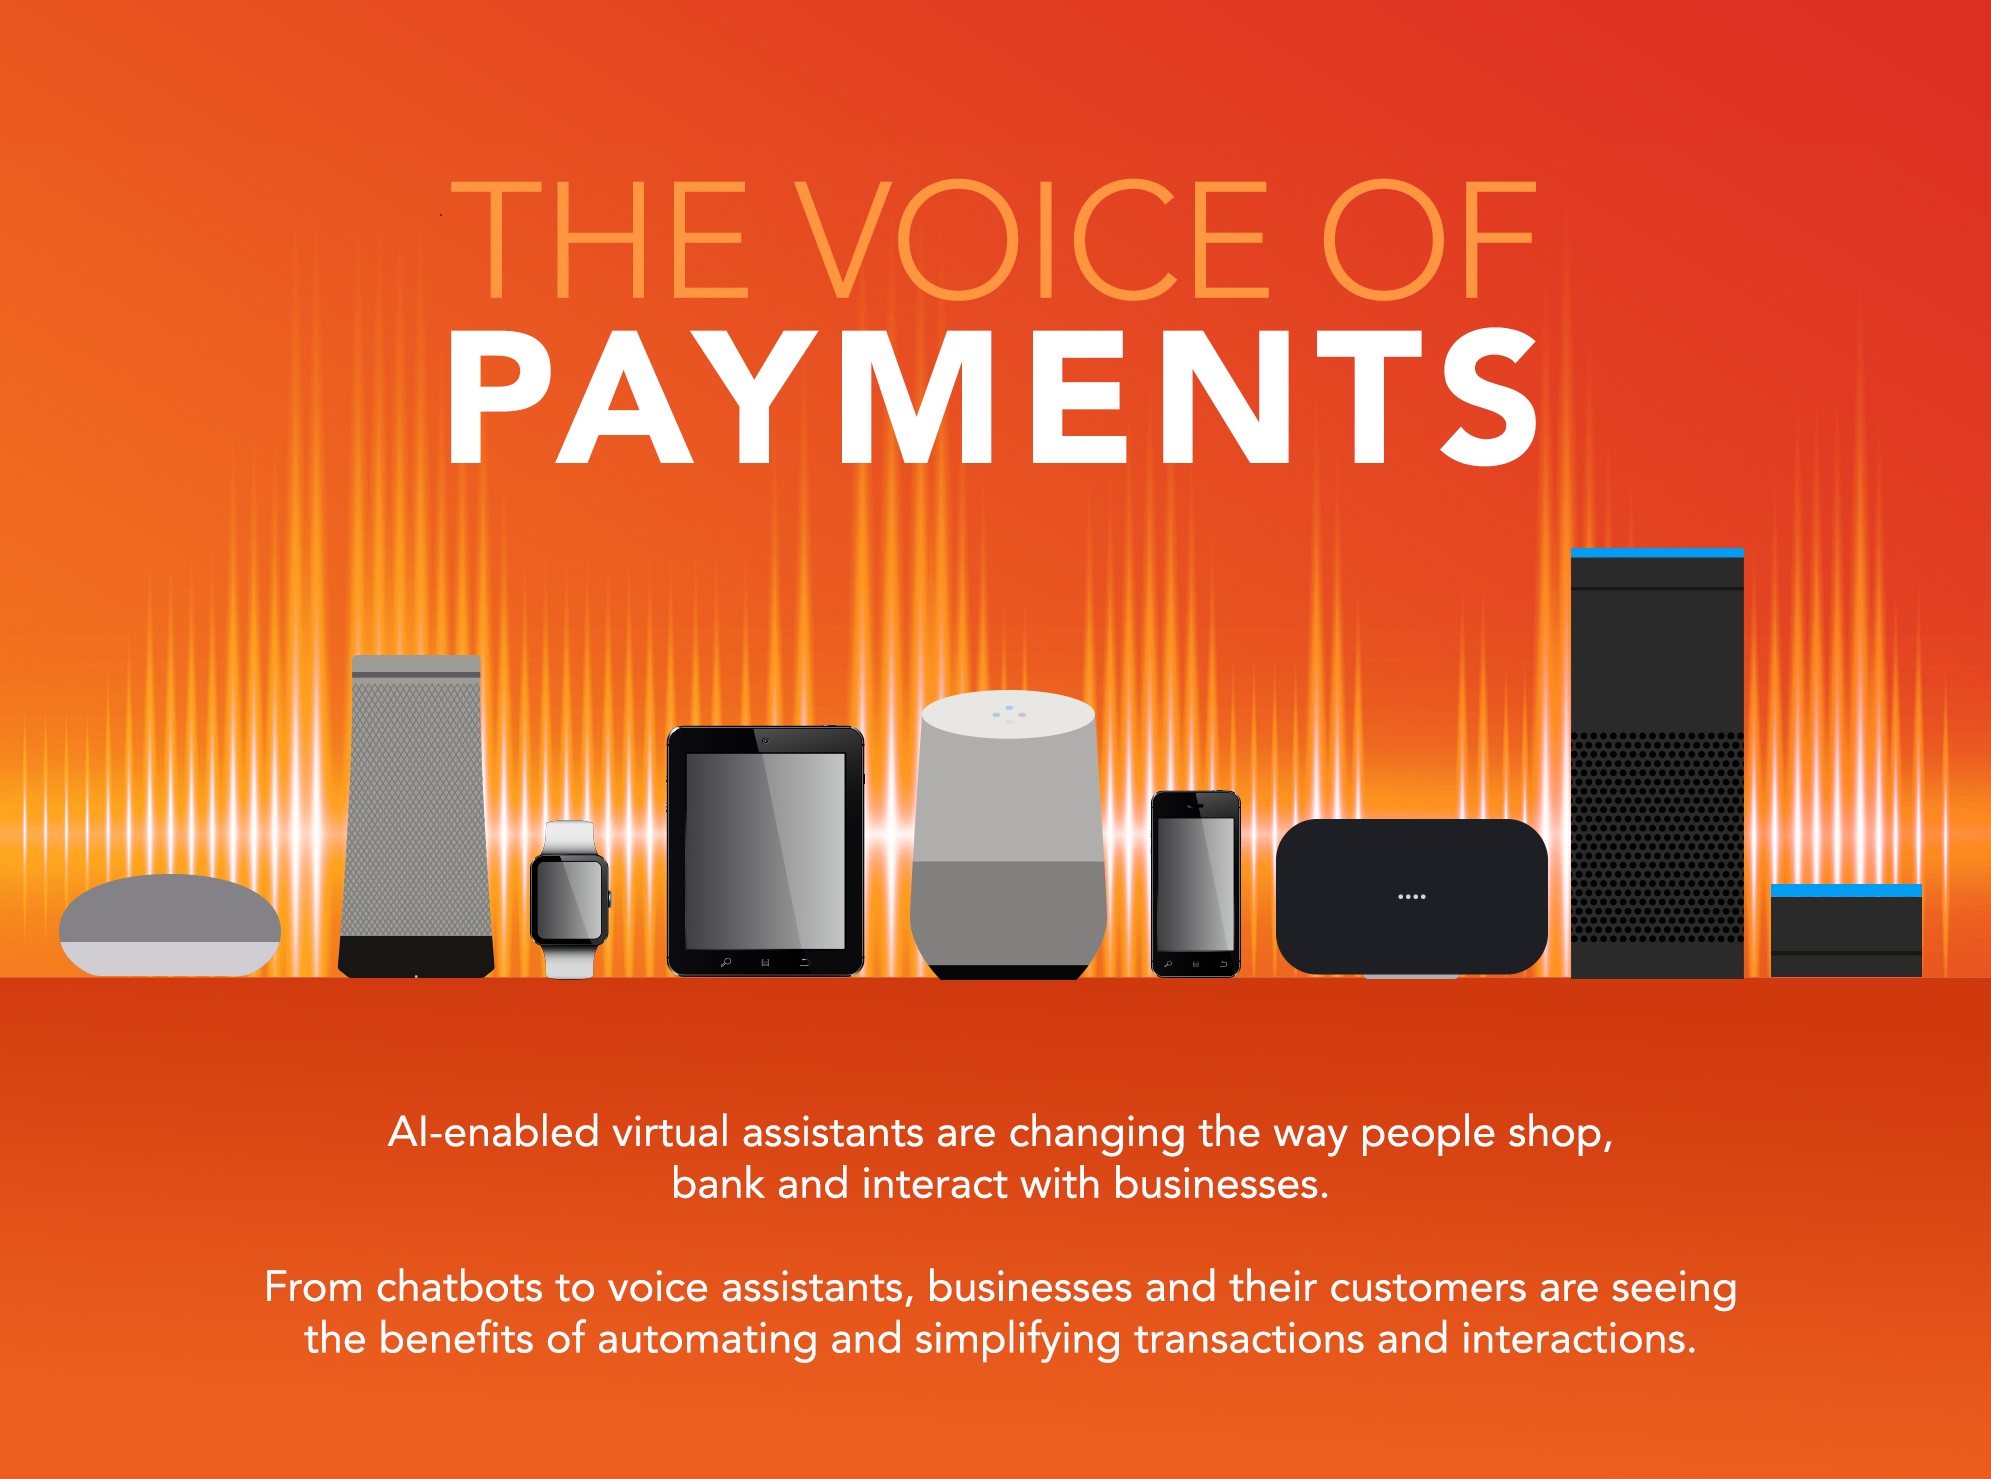 The Voice of Payments